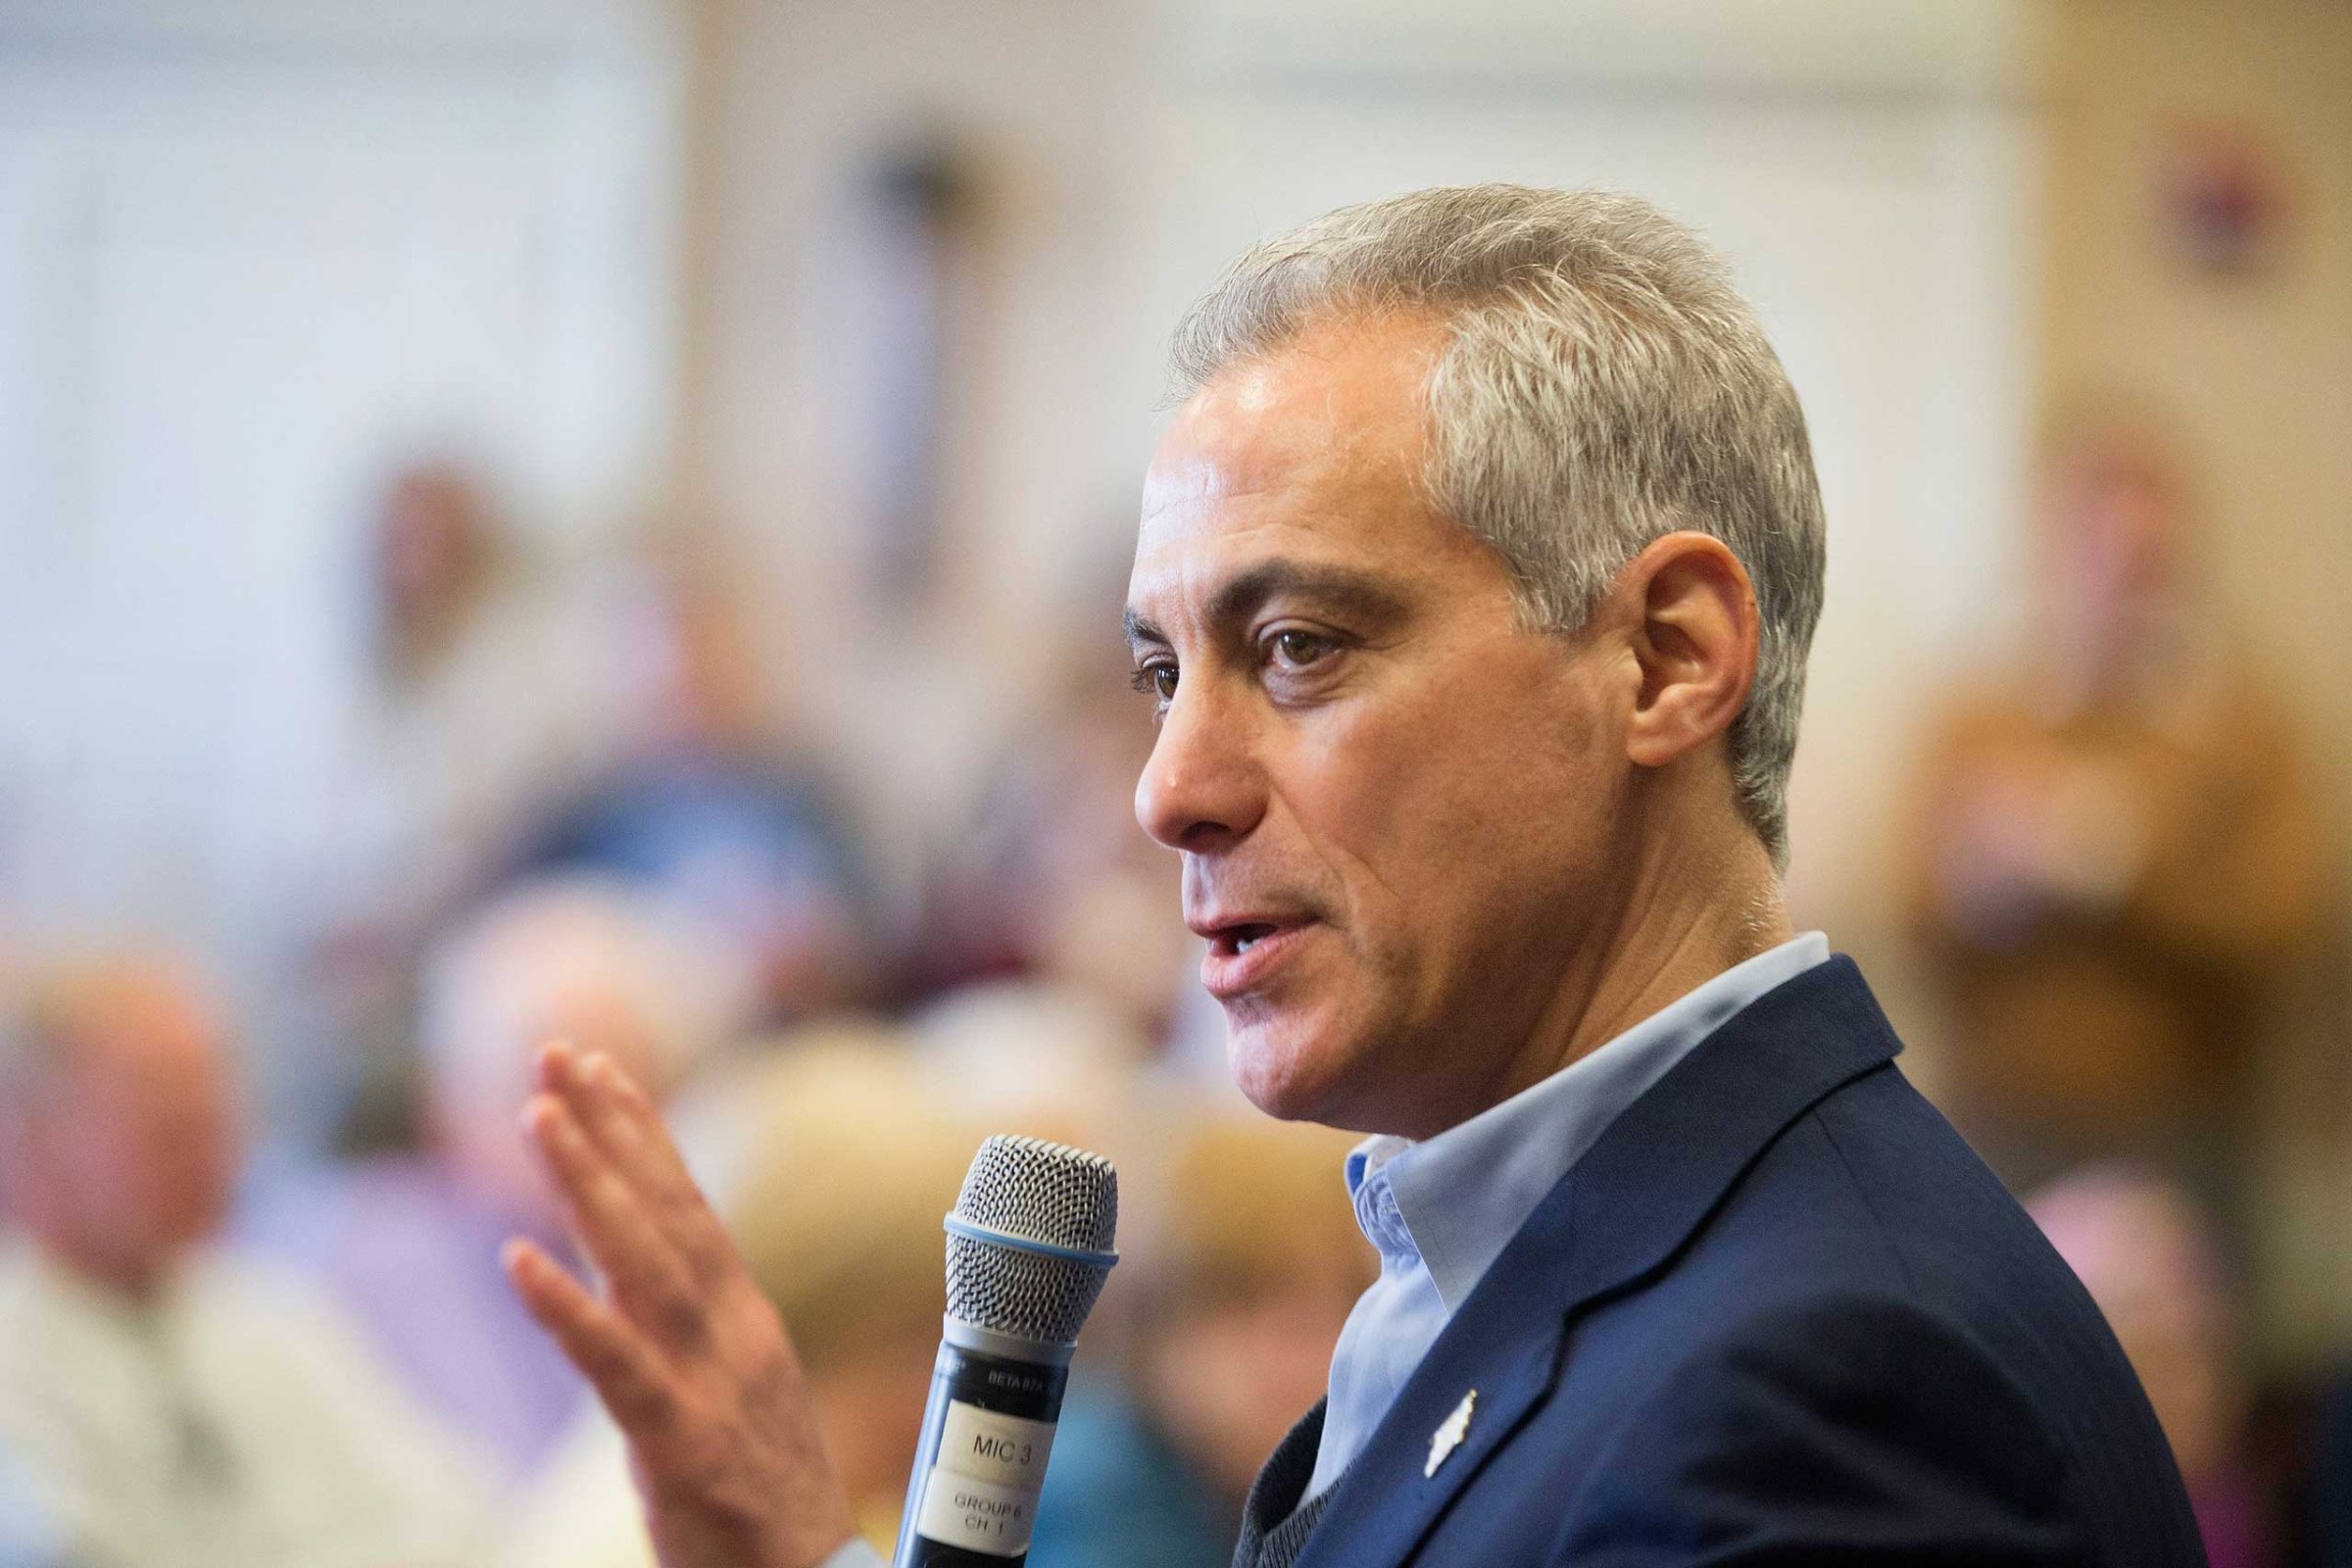 Chicago Mayor Rahm Emanuel talks with residents at a senior living center during a campaign stop on Feb. 23, 2015 in Chicago.